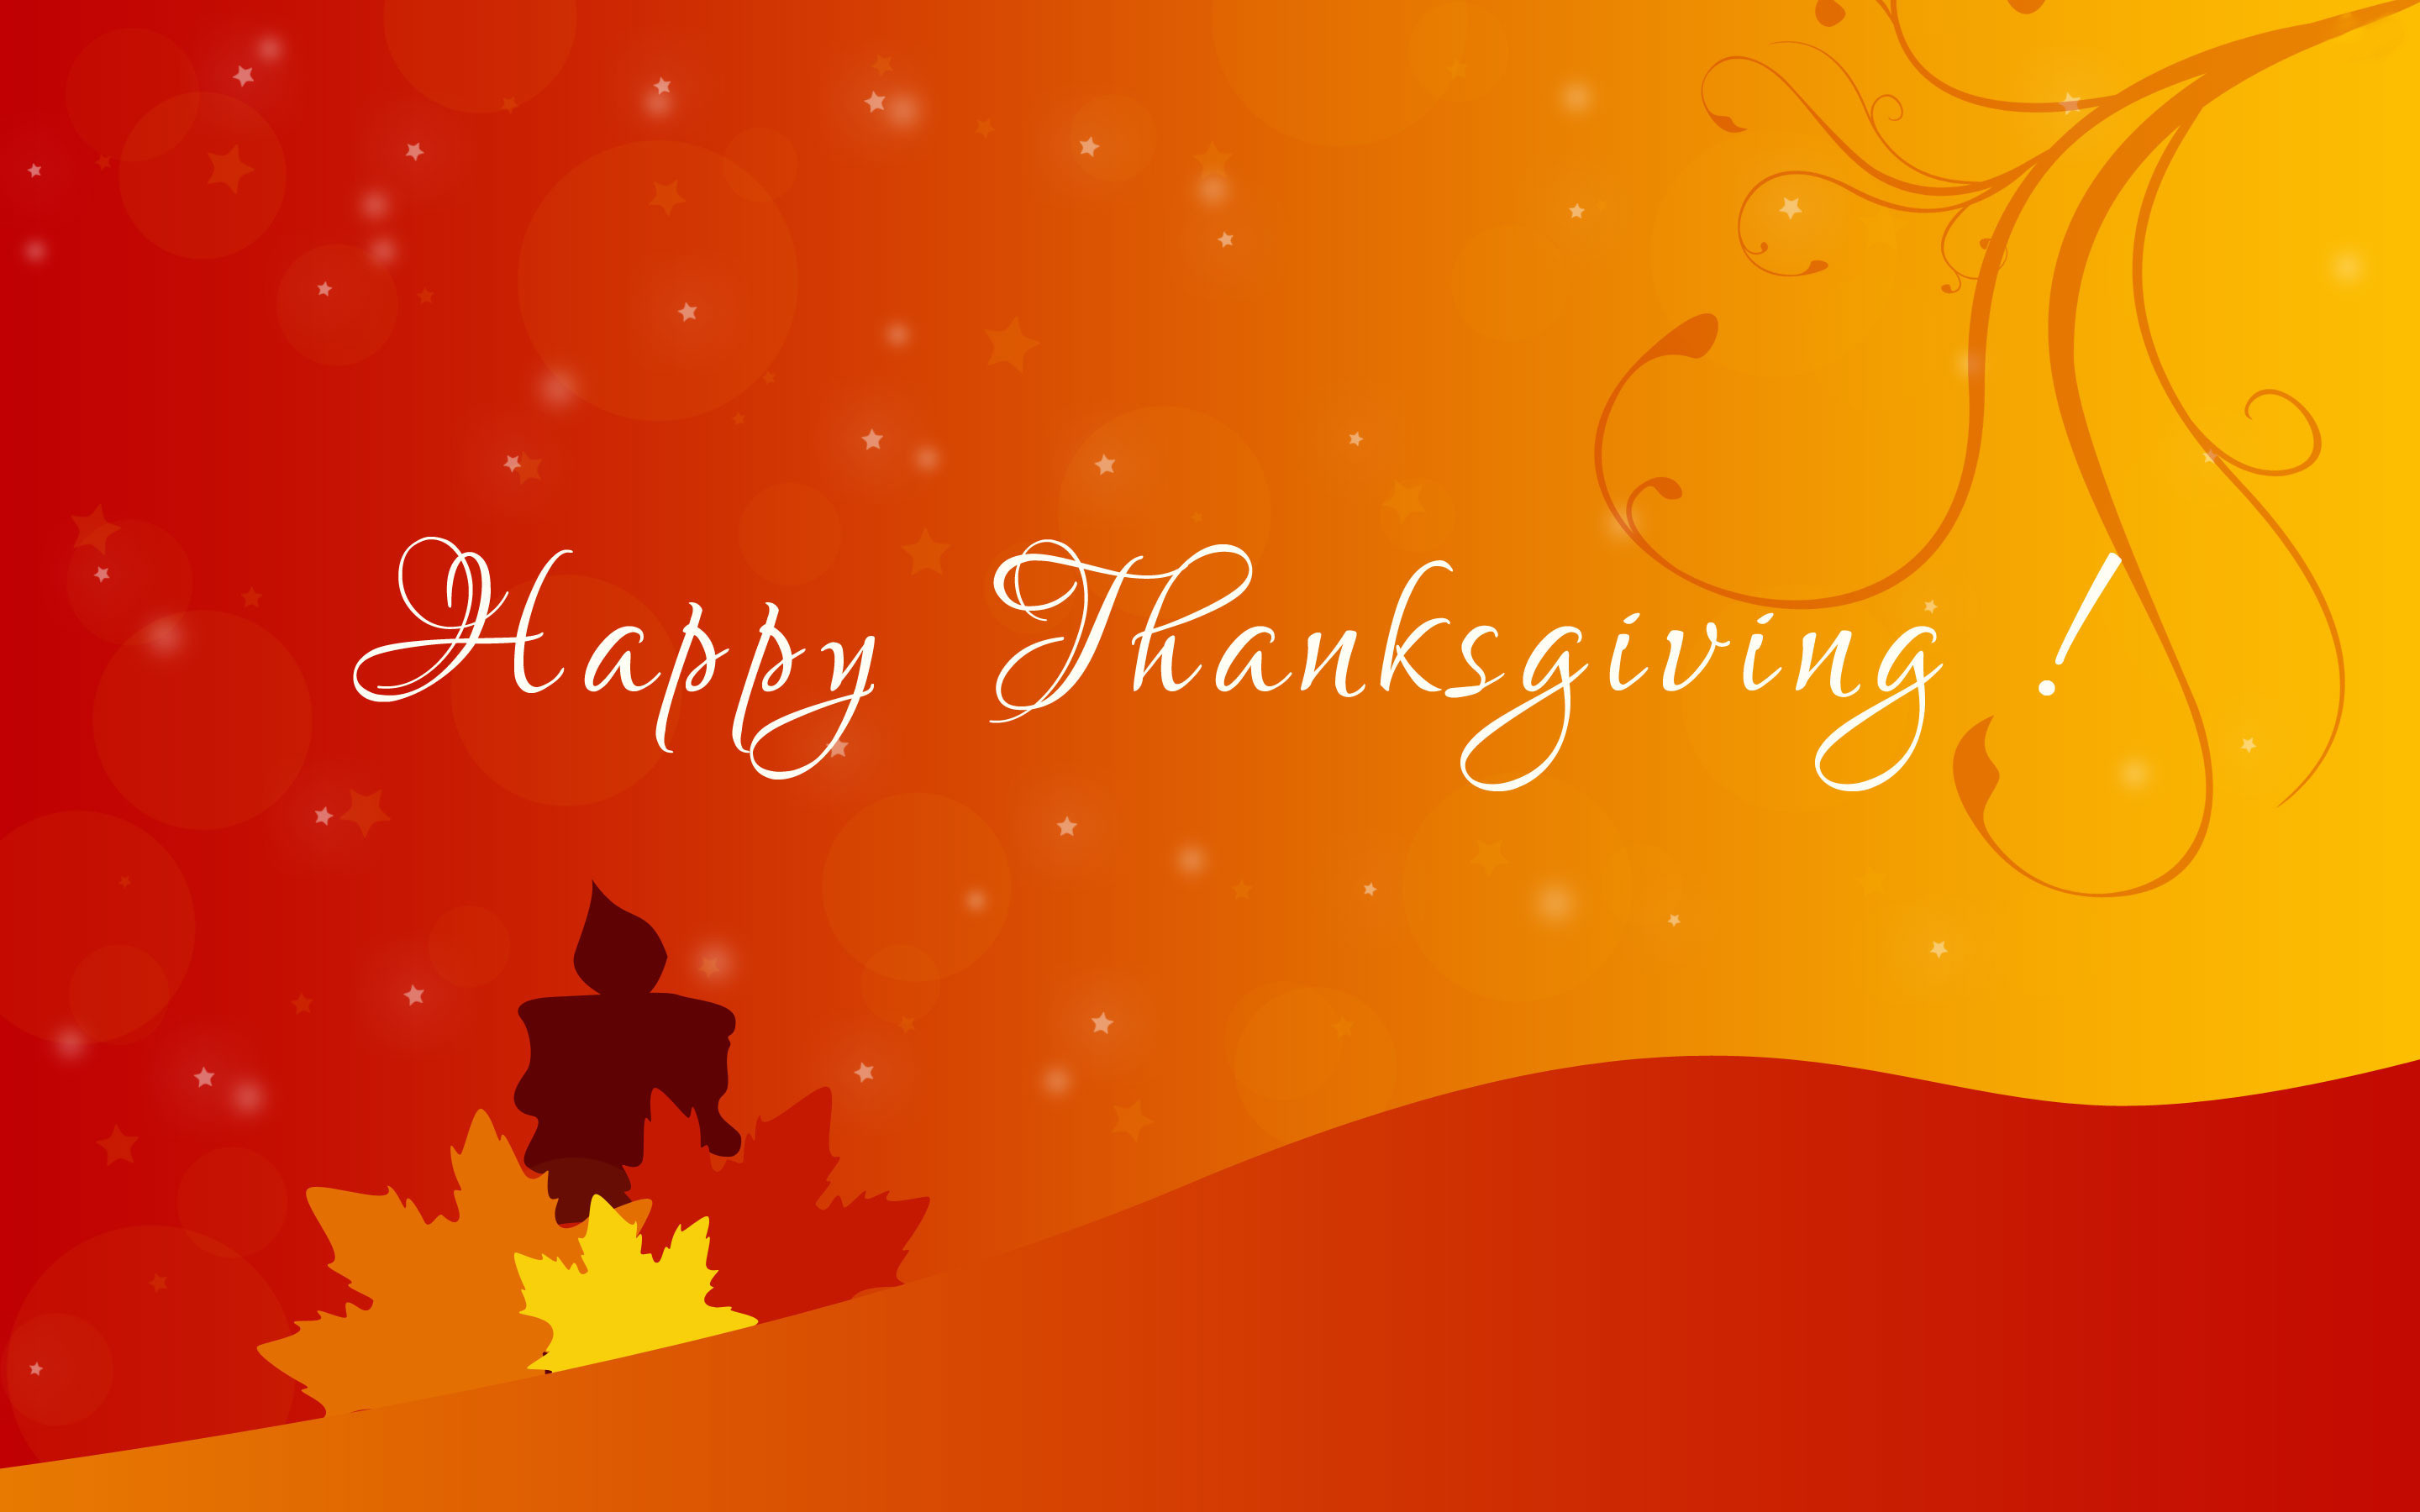 Free Thanksgiving Wallpapers Hd Download For Desktop - Happy Thanksgiving Wallpaper Hd - HD Wallpaper 